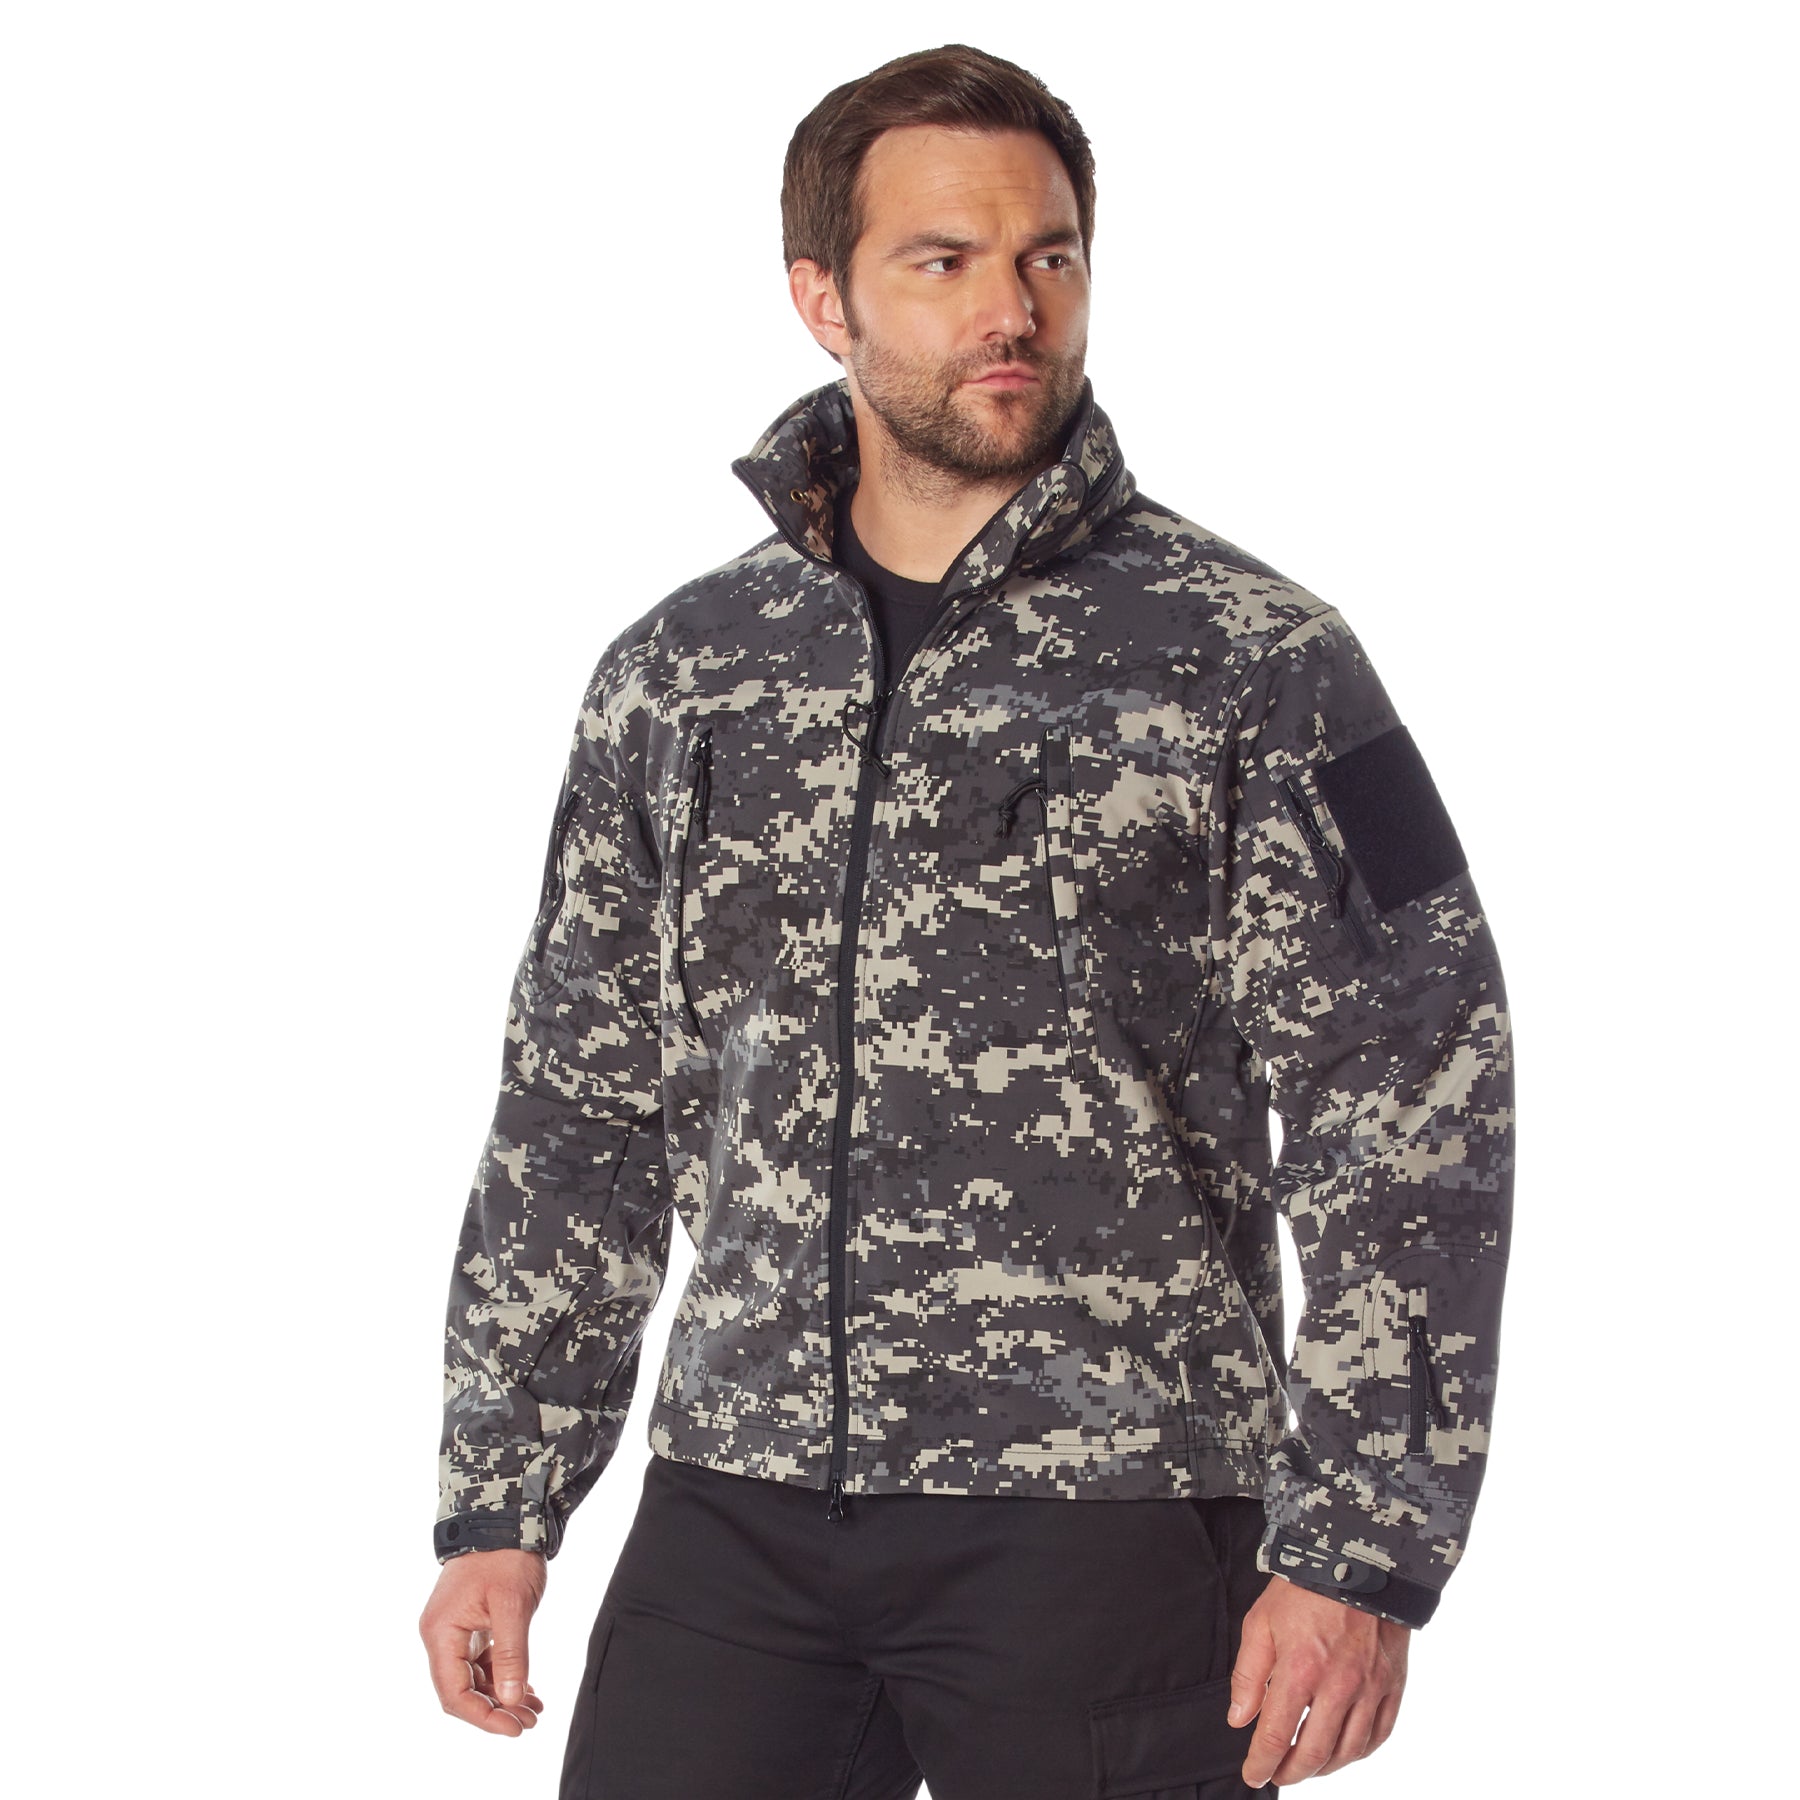 Poly Digital Camo Spec Ops Tactical Soft Shell Jackets